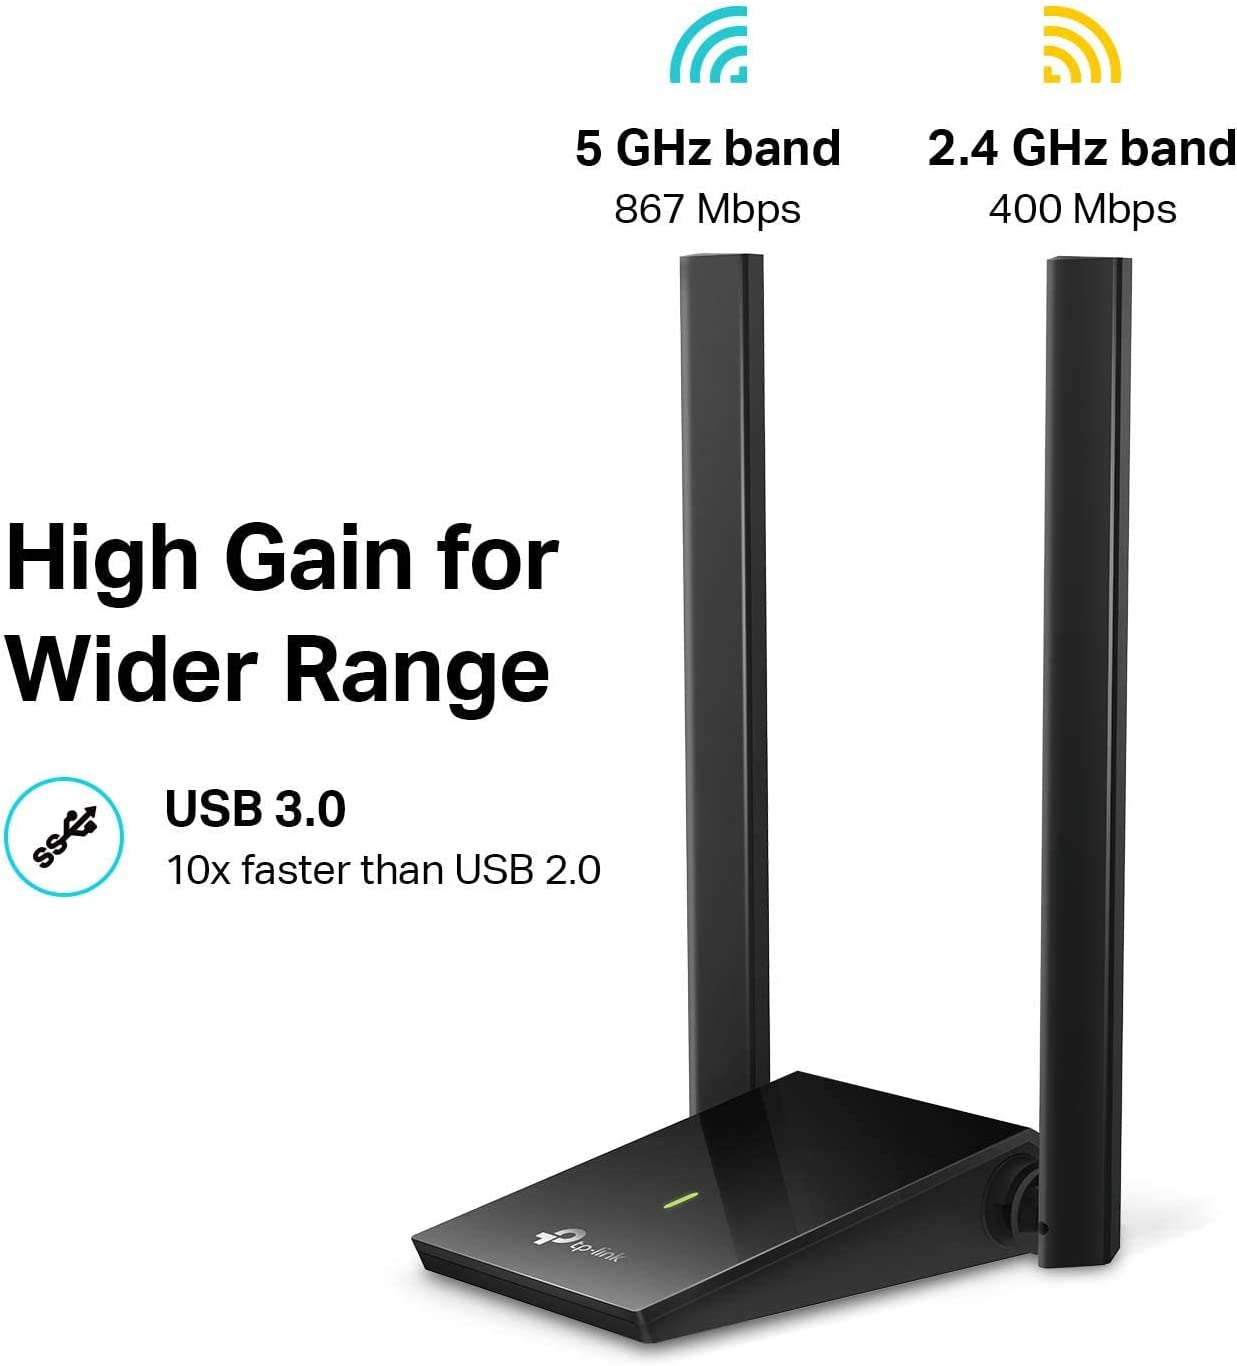 TP-Link USB WiFi Adapter, AC1300Mbps Dual Band 5dBi High Gain Antenna 2.4GHz/ 5GHz Wireless Network Adapter for Desktop PC (Archer T4U Plus)- Supports Windows 11/10/8.1/8/7, Mac OS 10.9-10.14